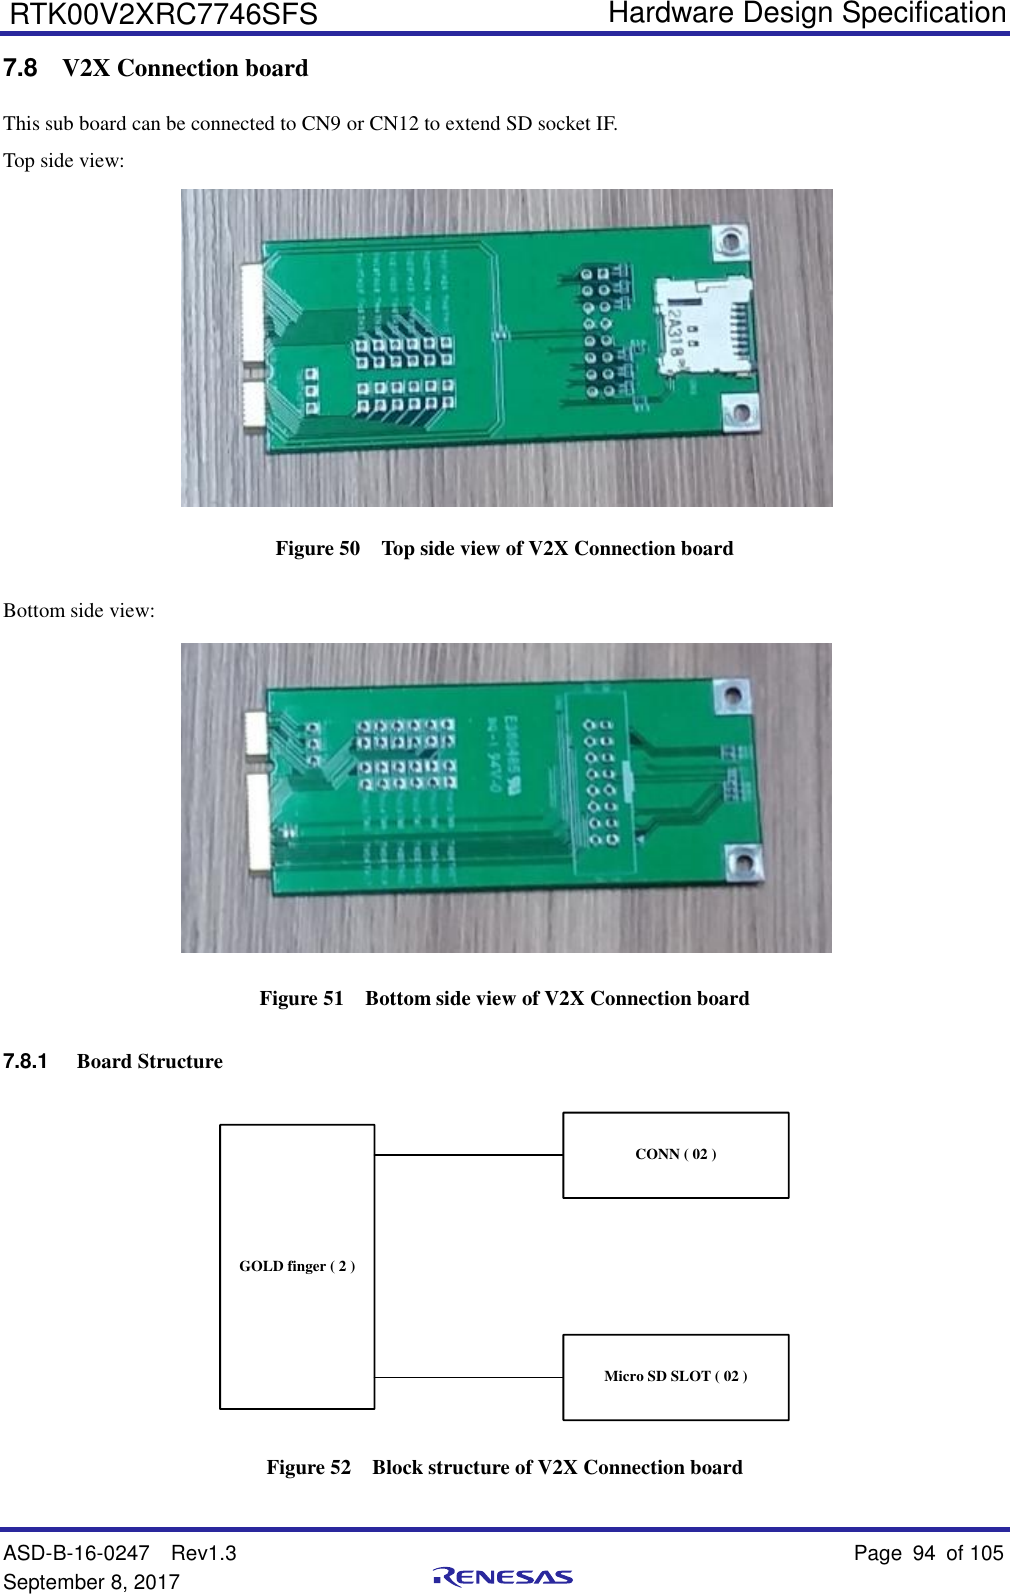   Hardware Design Specification ASD-B-16-0247  Rev1.3    Page 94  of 105 September 8, 2017      RTK00V2XRC7746SFS 7.8  V2X Connection board This sub board can be connected to CN9 or CN12 to extend SD socket IF. Top side view:  Figure 50  Top side view of V2X Connection board Bottom side view:  Figure 51  Bottom side view of V2X Connection board 7.8.1 Board Structure GOLD finger ( 2 )CONN ( 02 )Micro SD SLOT ( 02 ) Figure 52  Block structure of V2X Connection board 